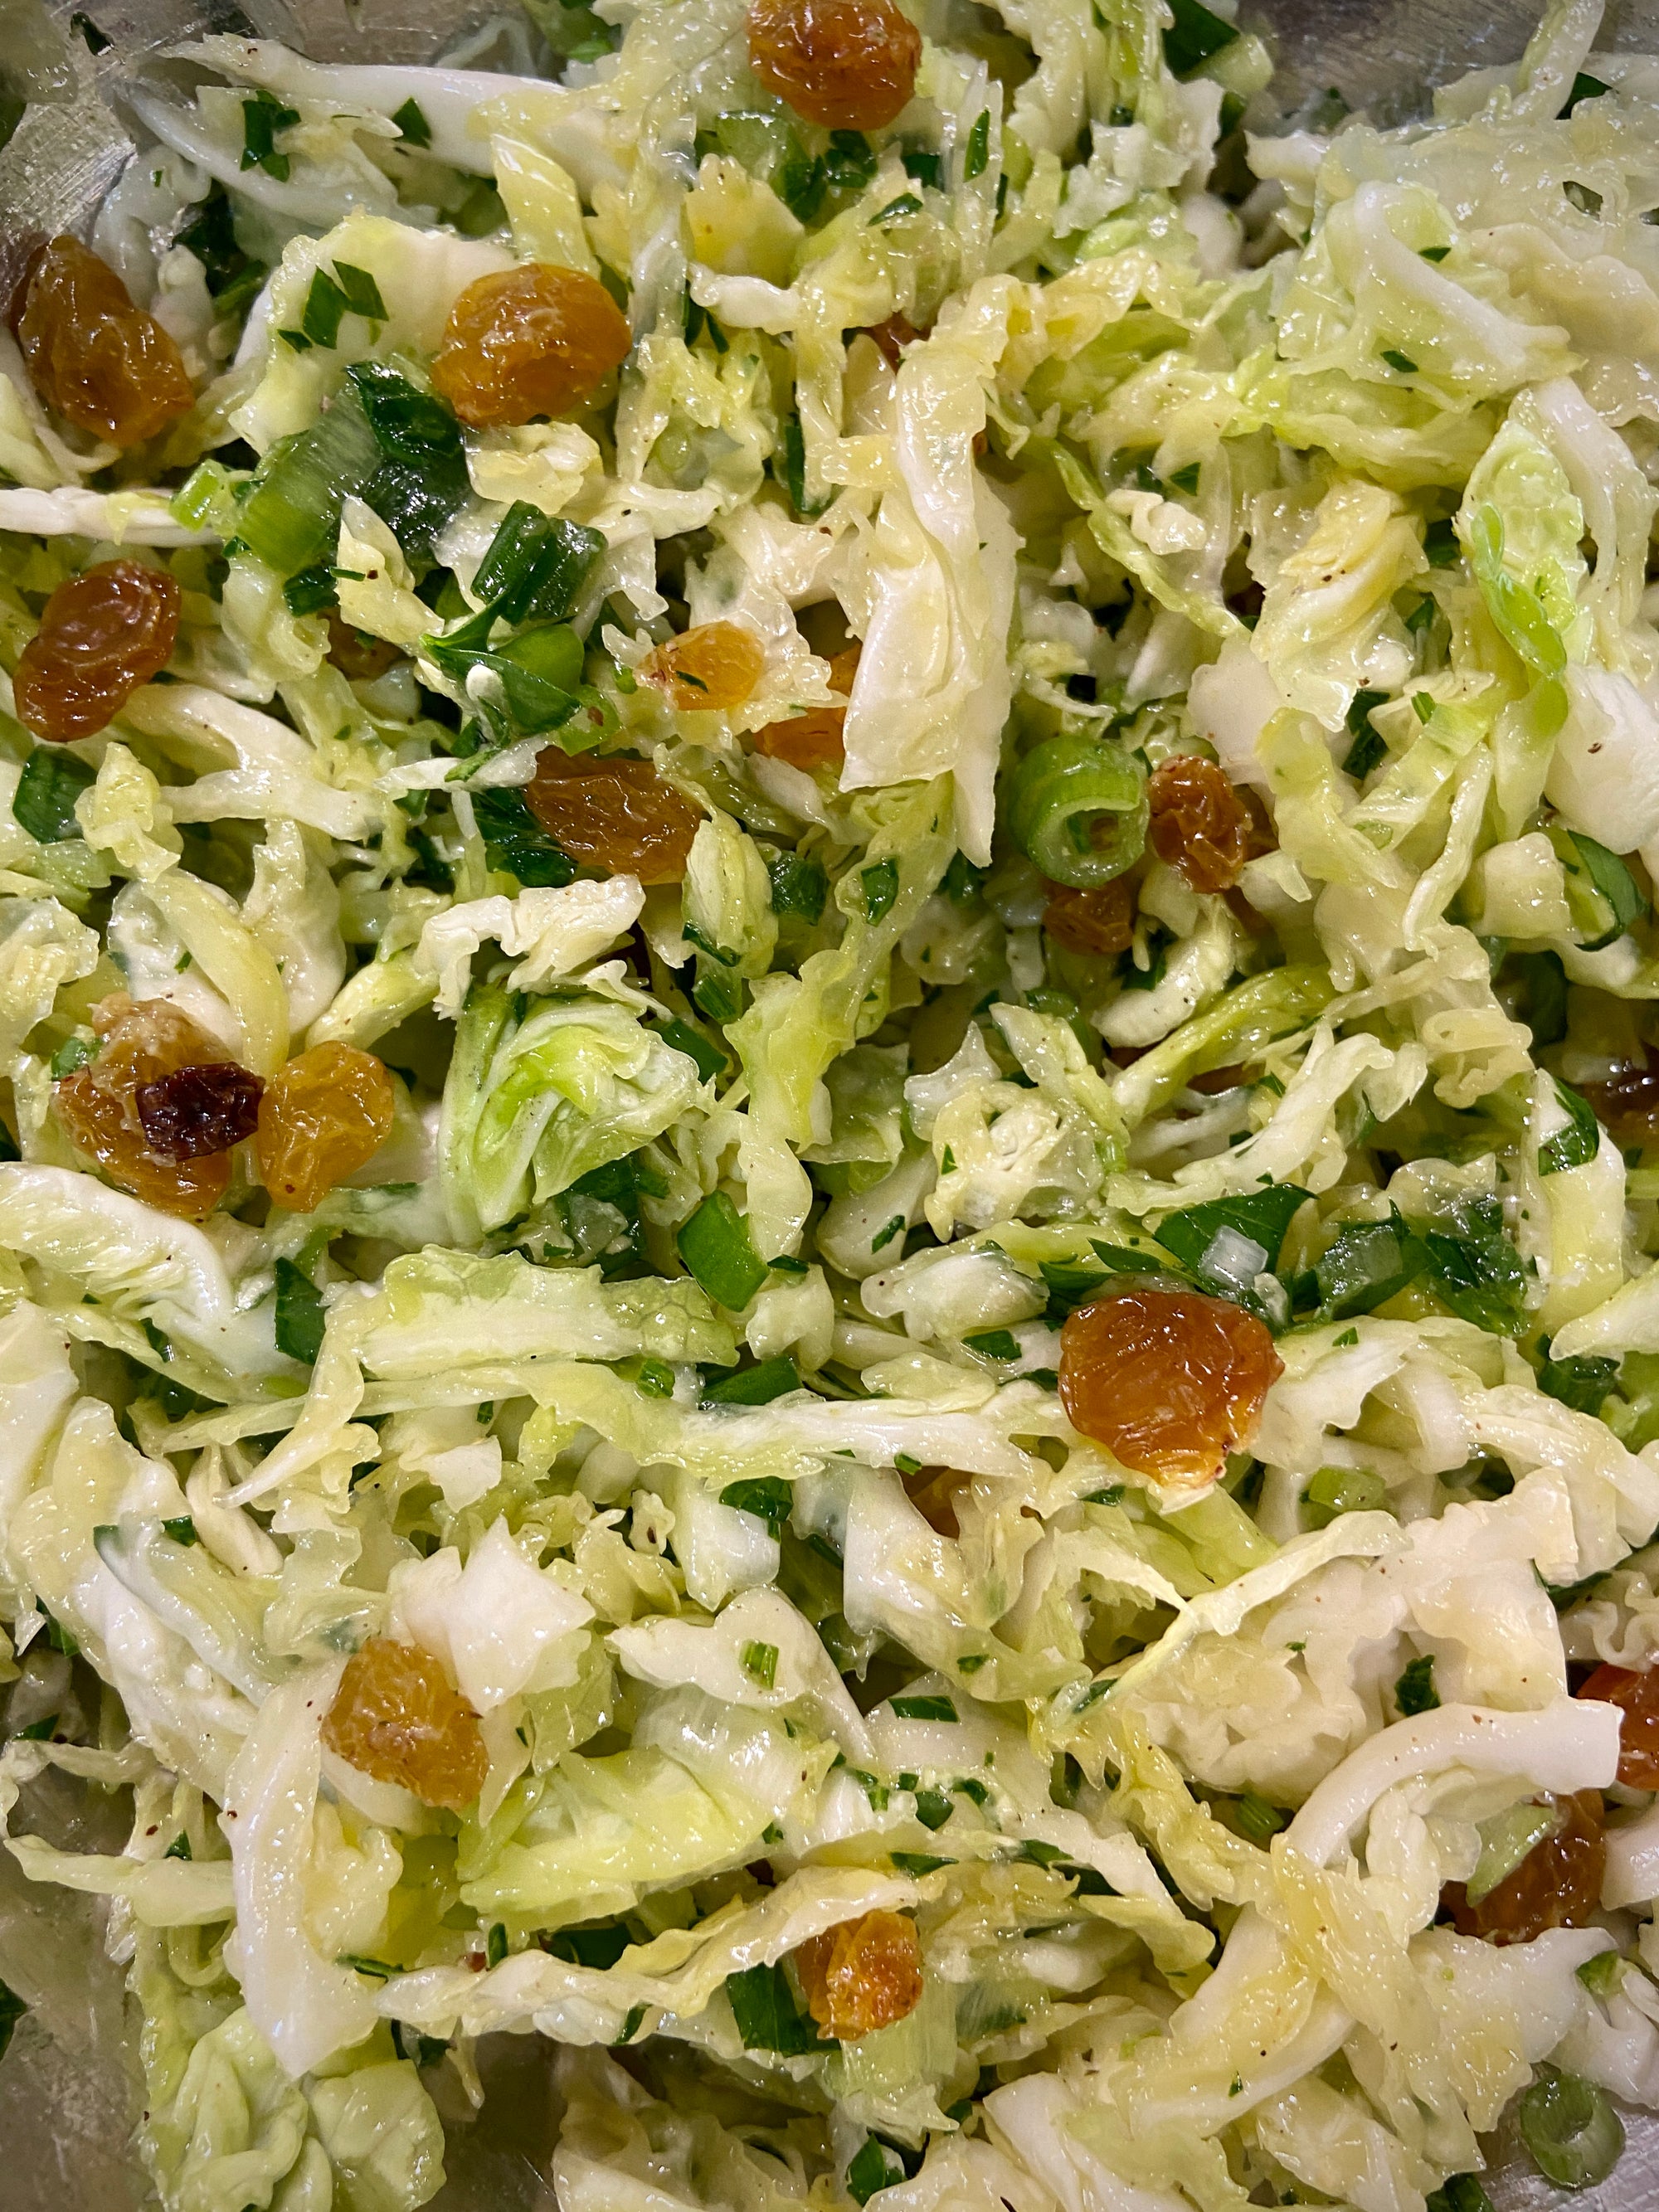 Cabbage Slaw with Biancolilla